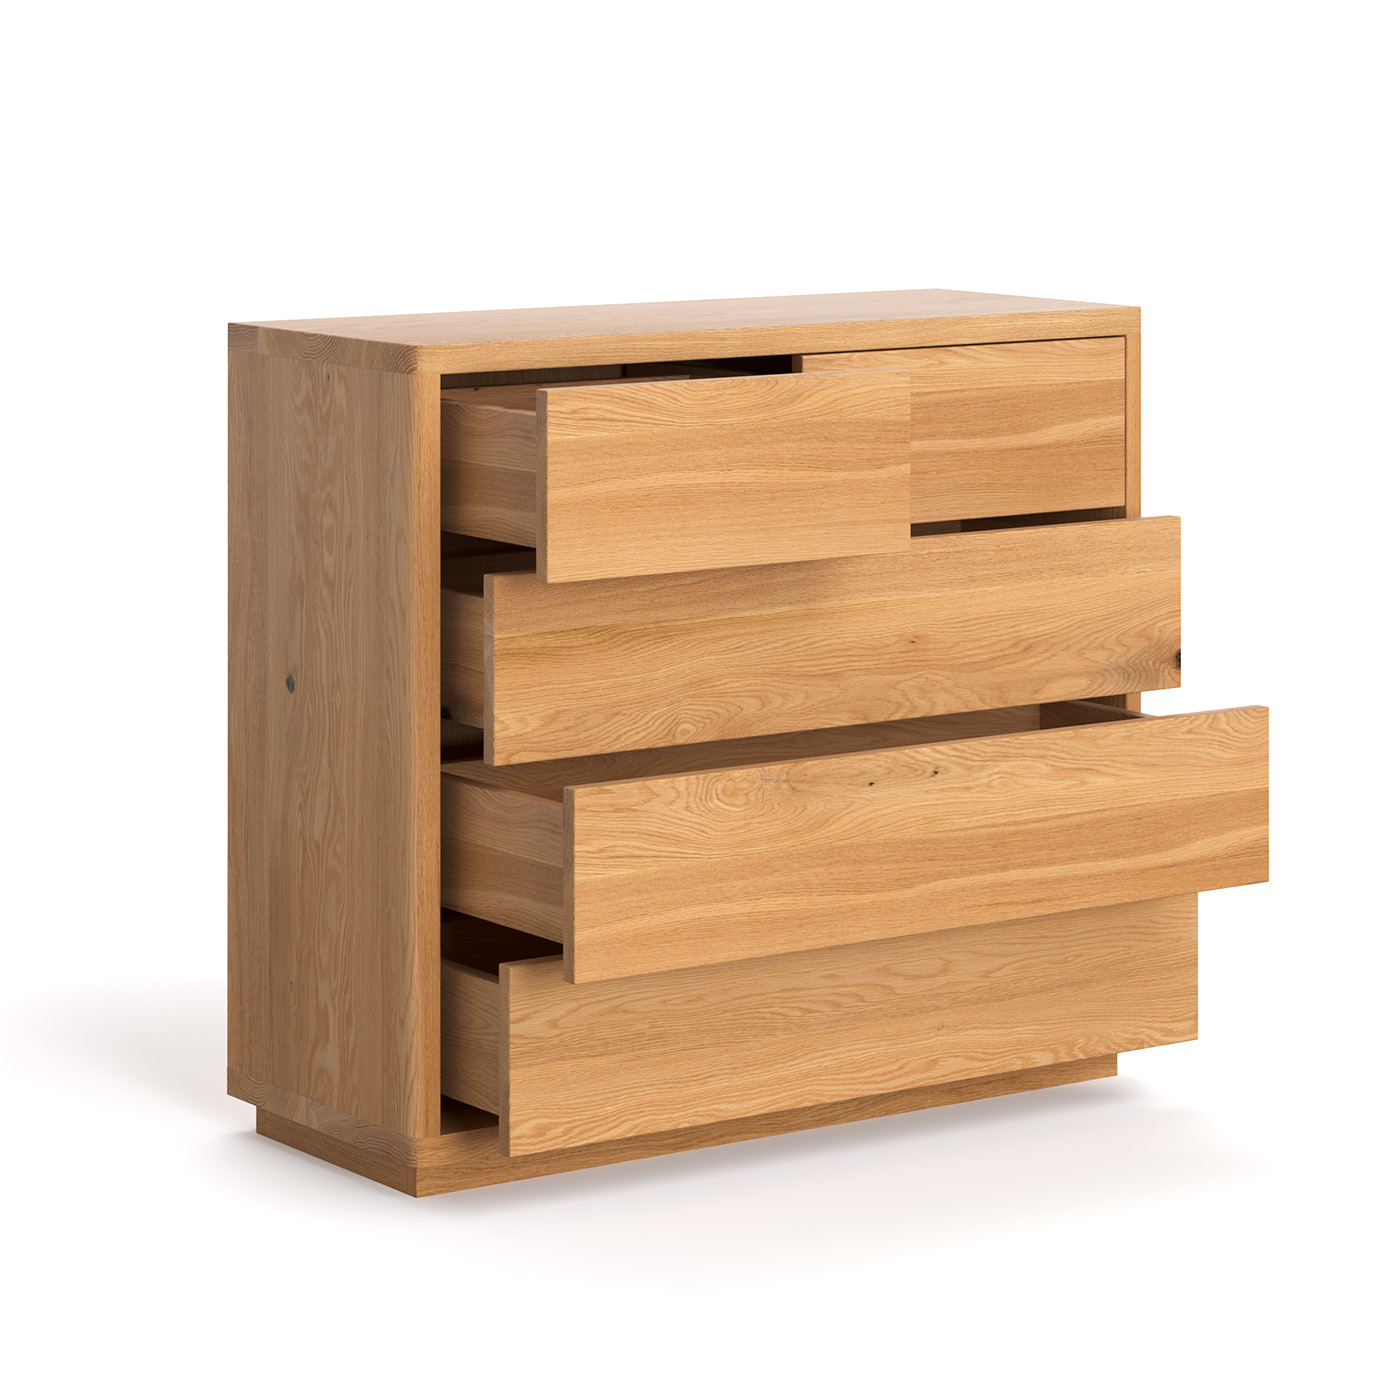 Soma solid wood chest of drawers - Danzz